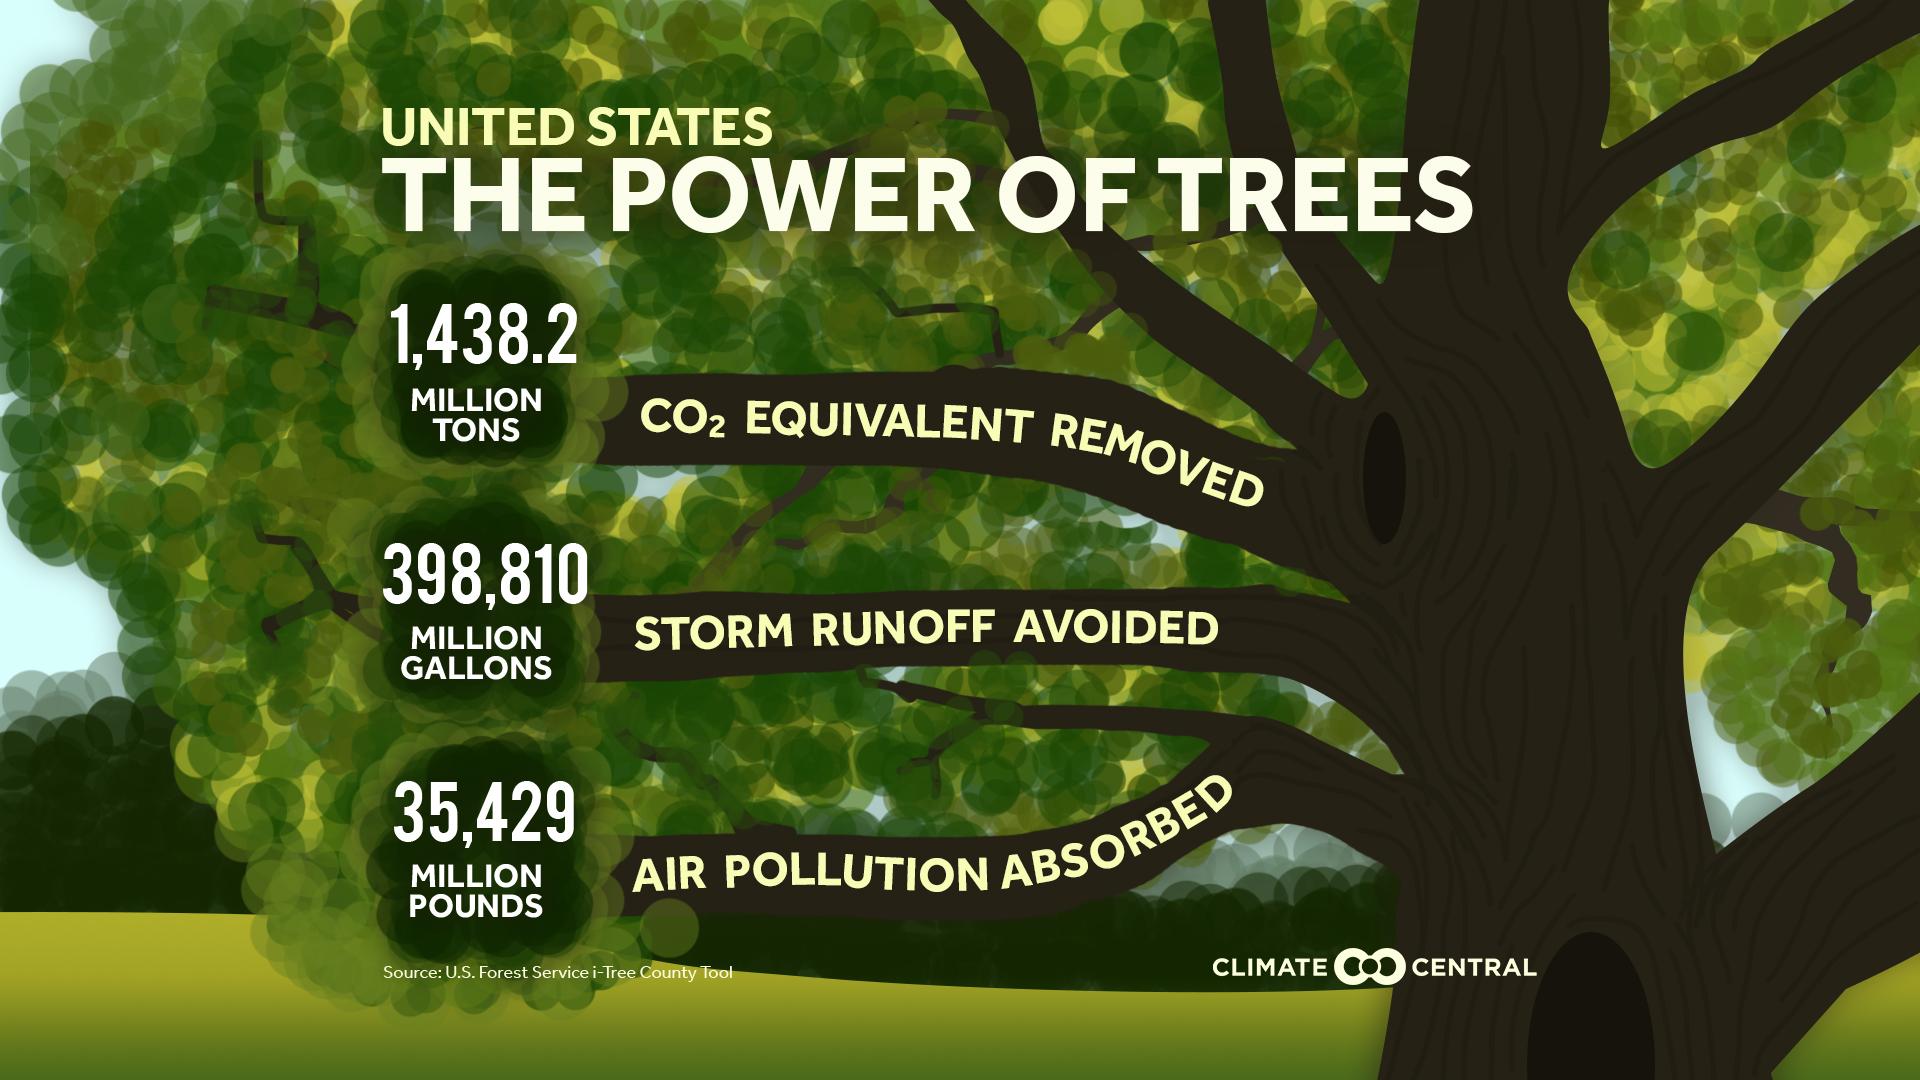 The Power of Trees